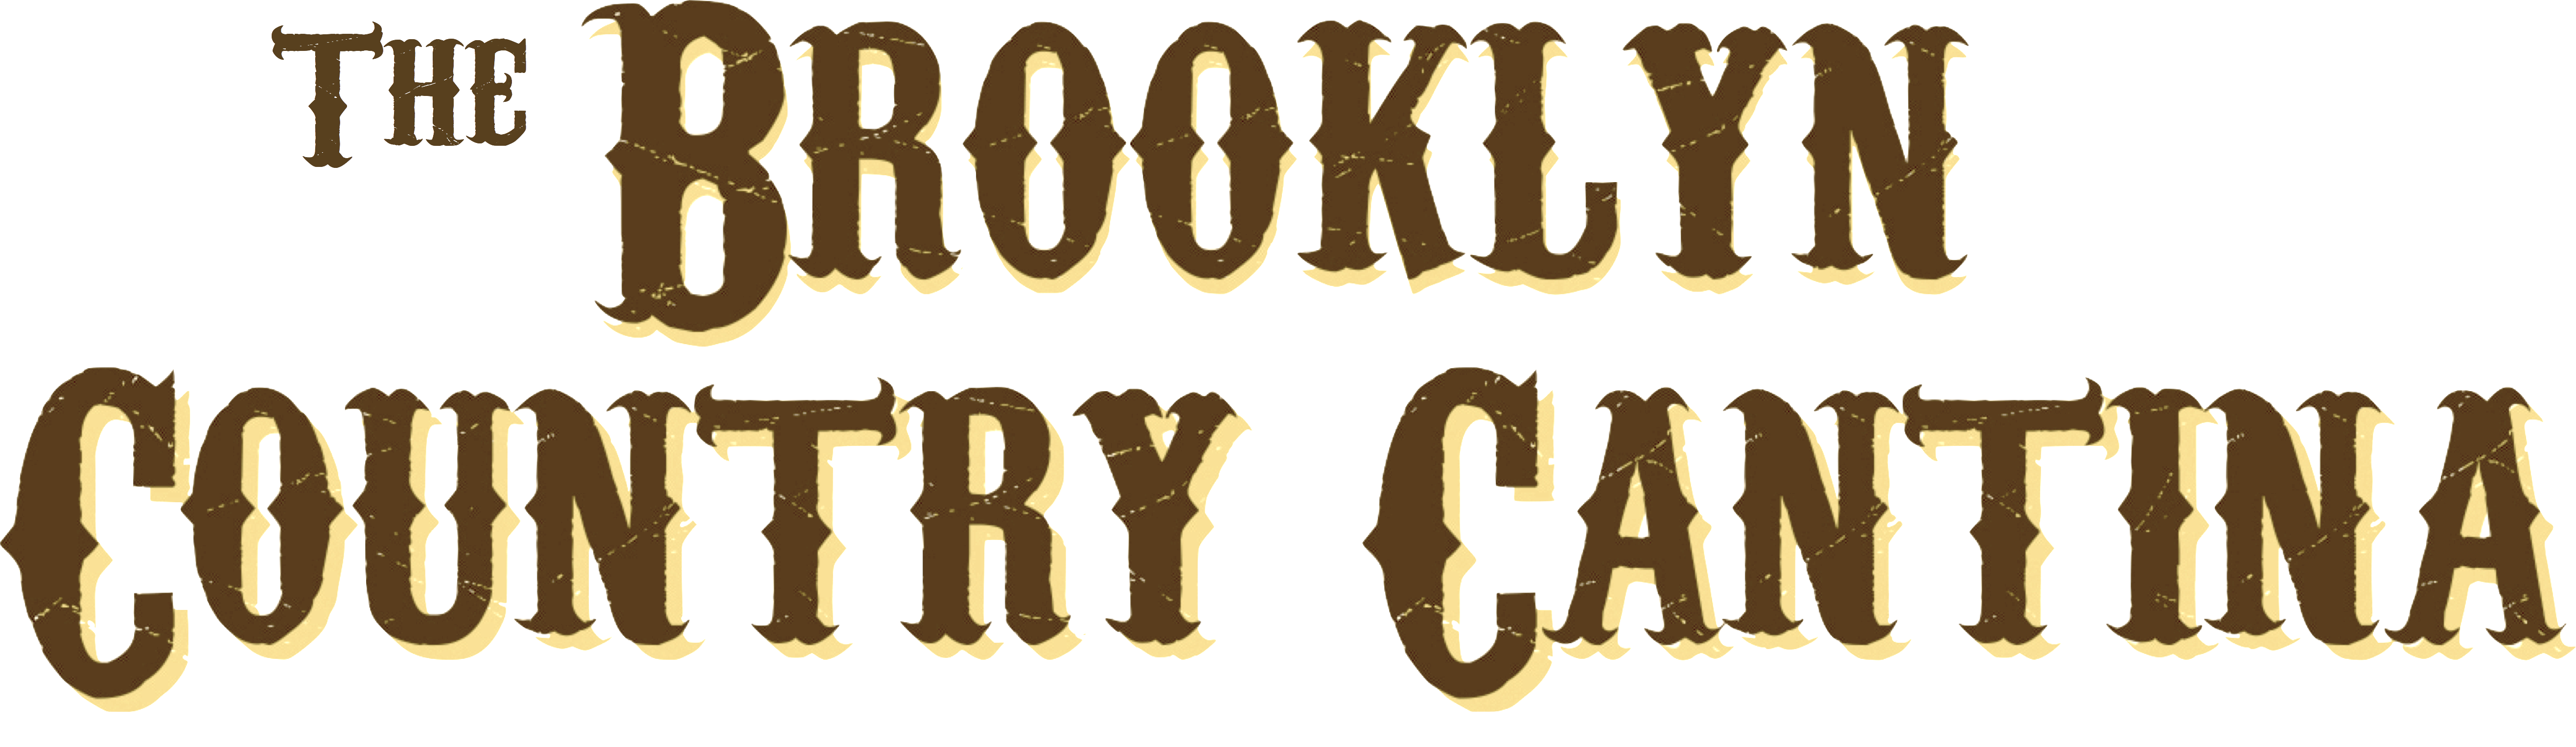 The Brooklyn Country Cantina